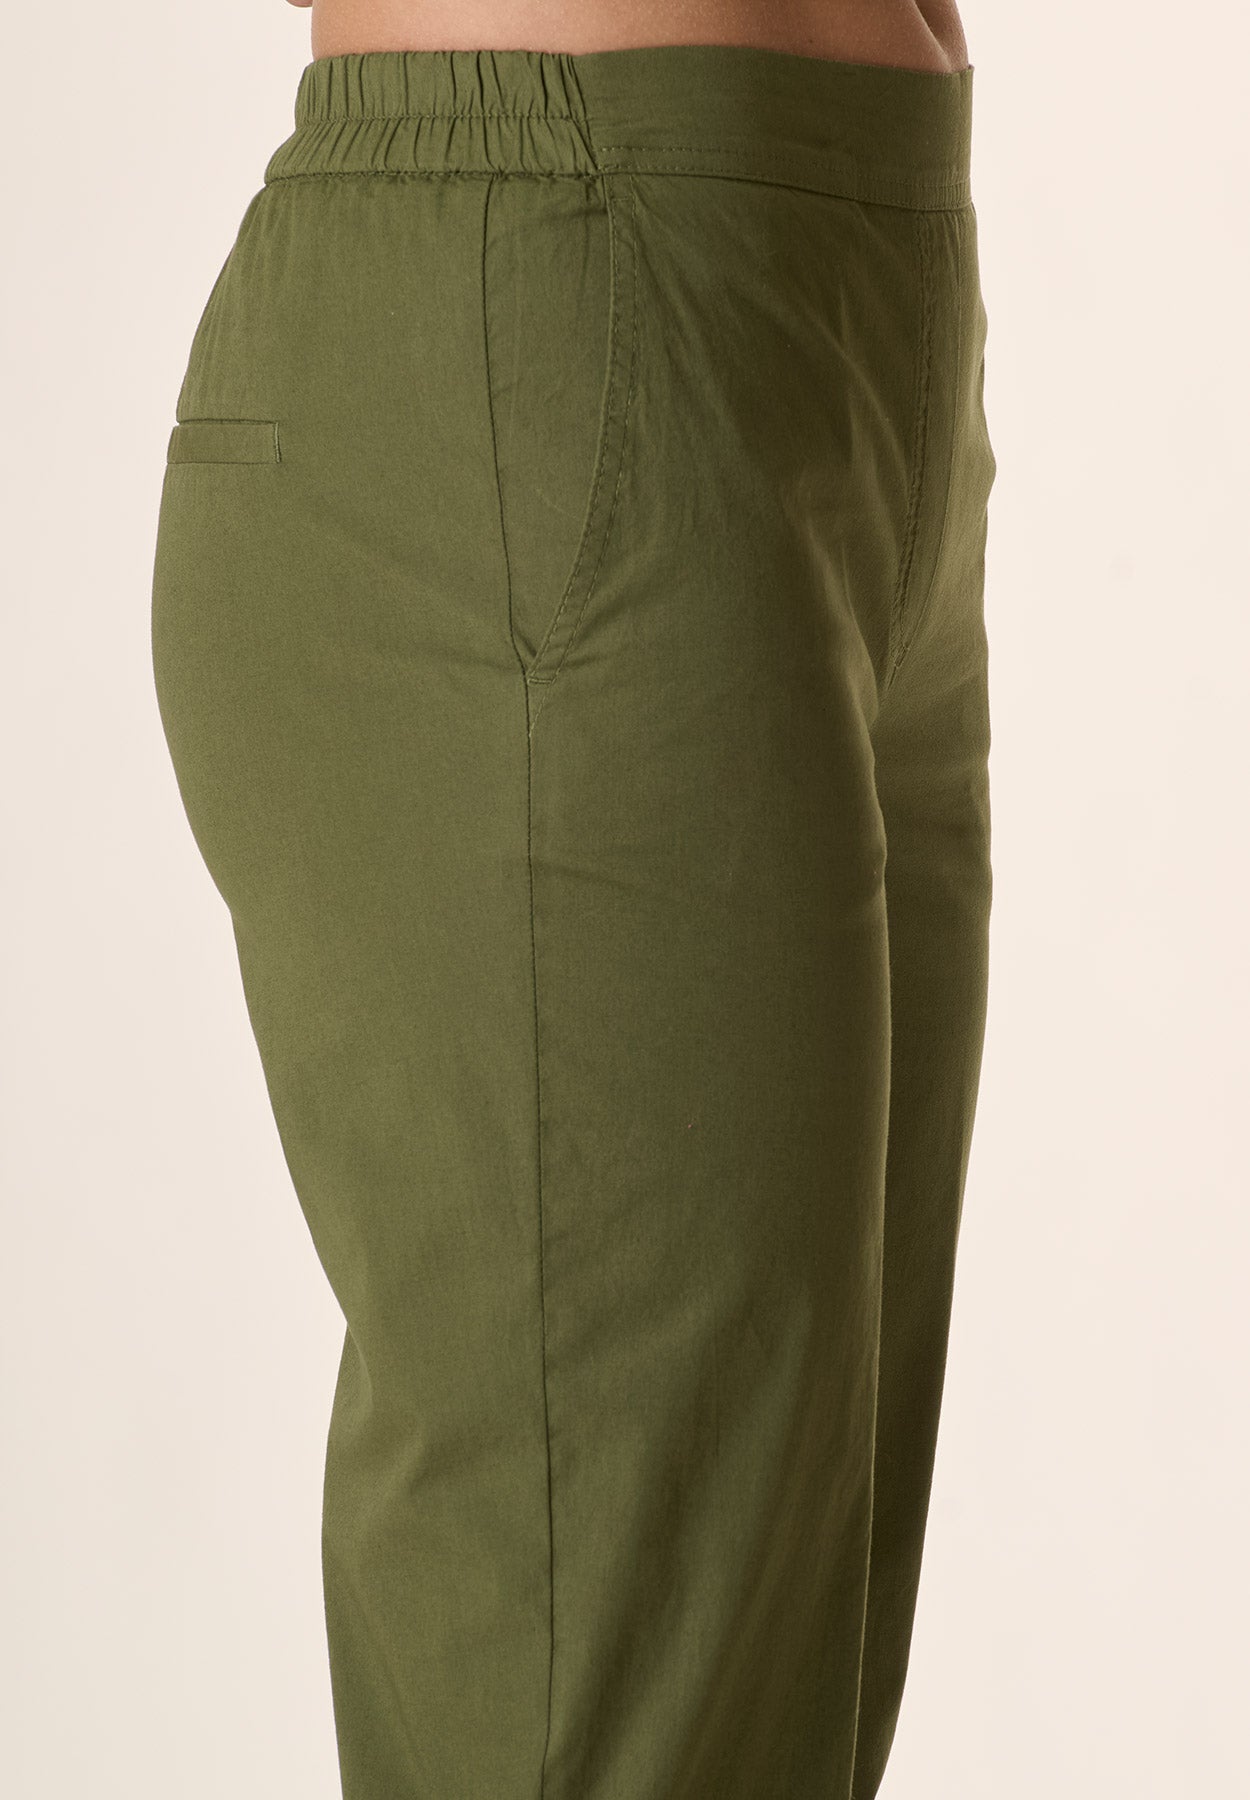 Military elastic waist cotton stretch trousers